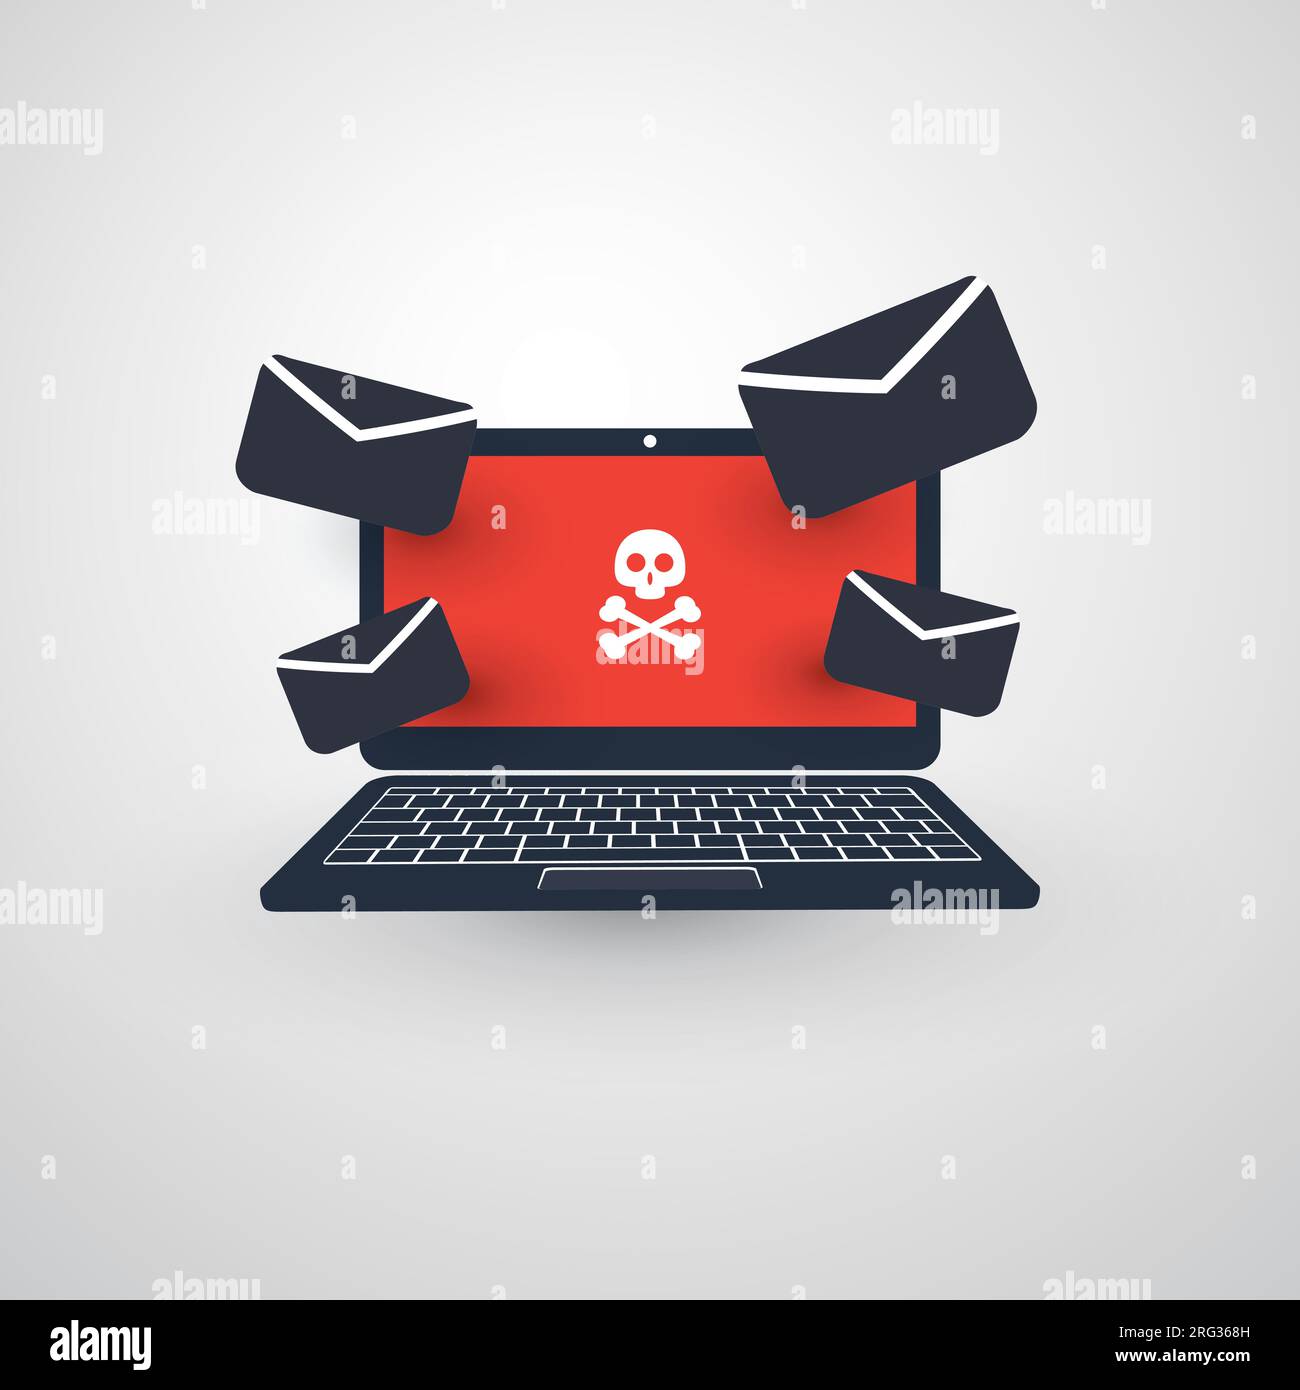 Laptop and Envelopes - Malware Infection by E-mail - Virus, Backdoor, Ransomware, Fraud, Spam, Phishing, Email Scam, Hacker Attack - IT Security Conce Stock Vector